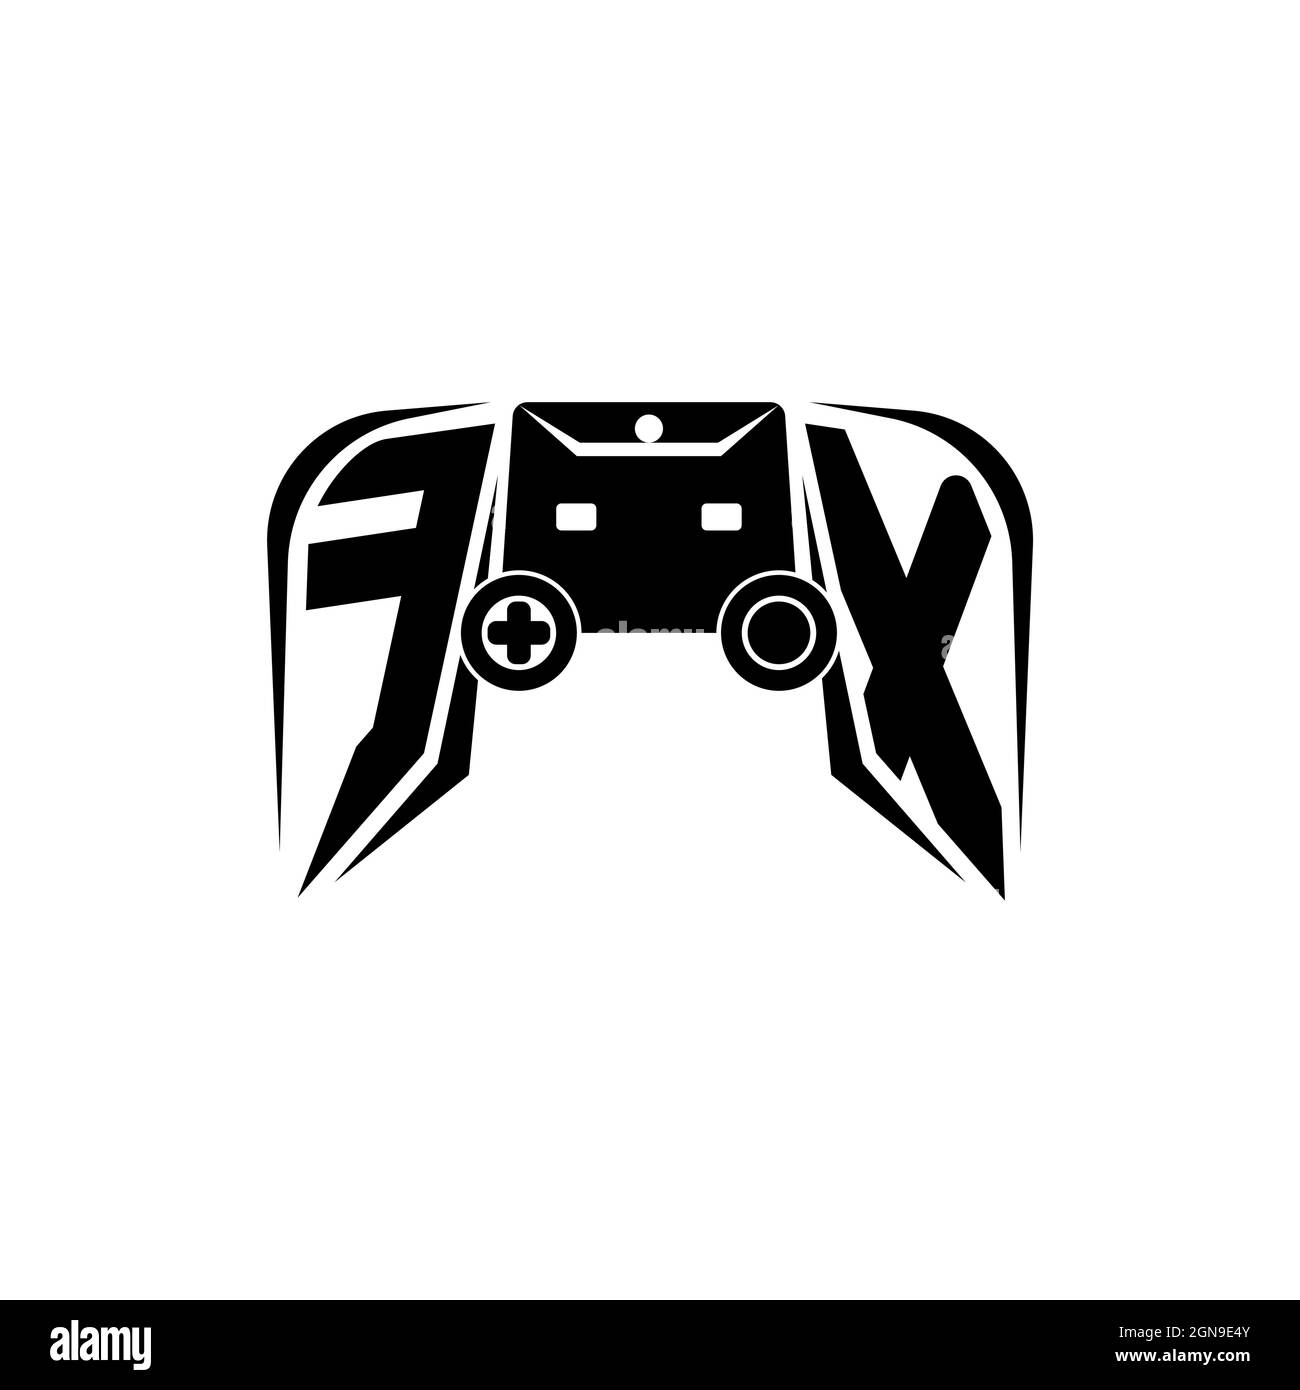 FX Initial ESport gaming logo. Game console shape style vector